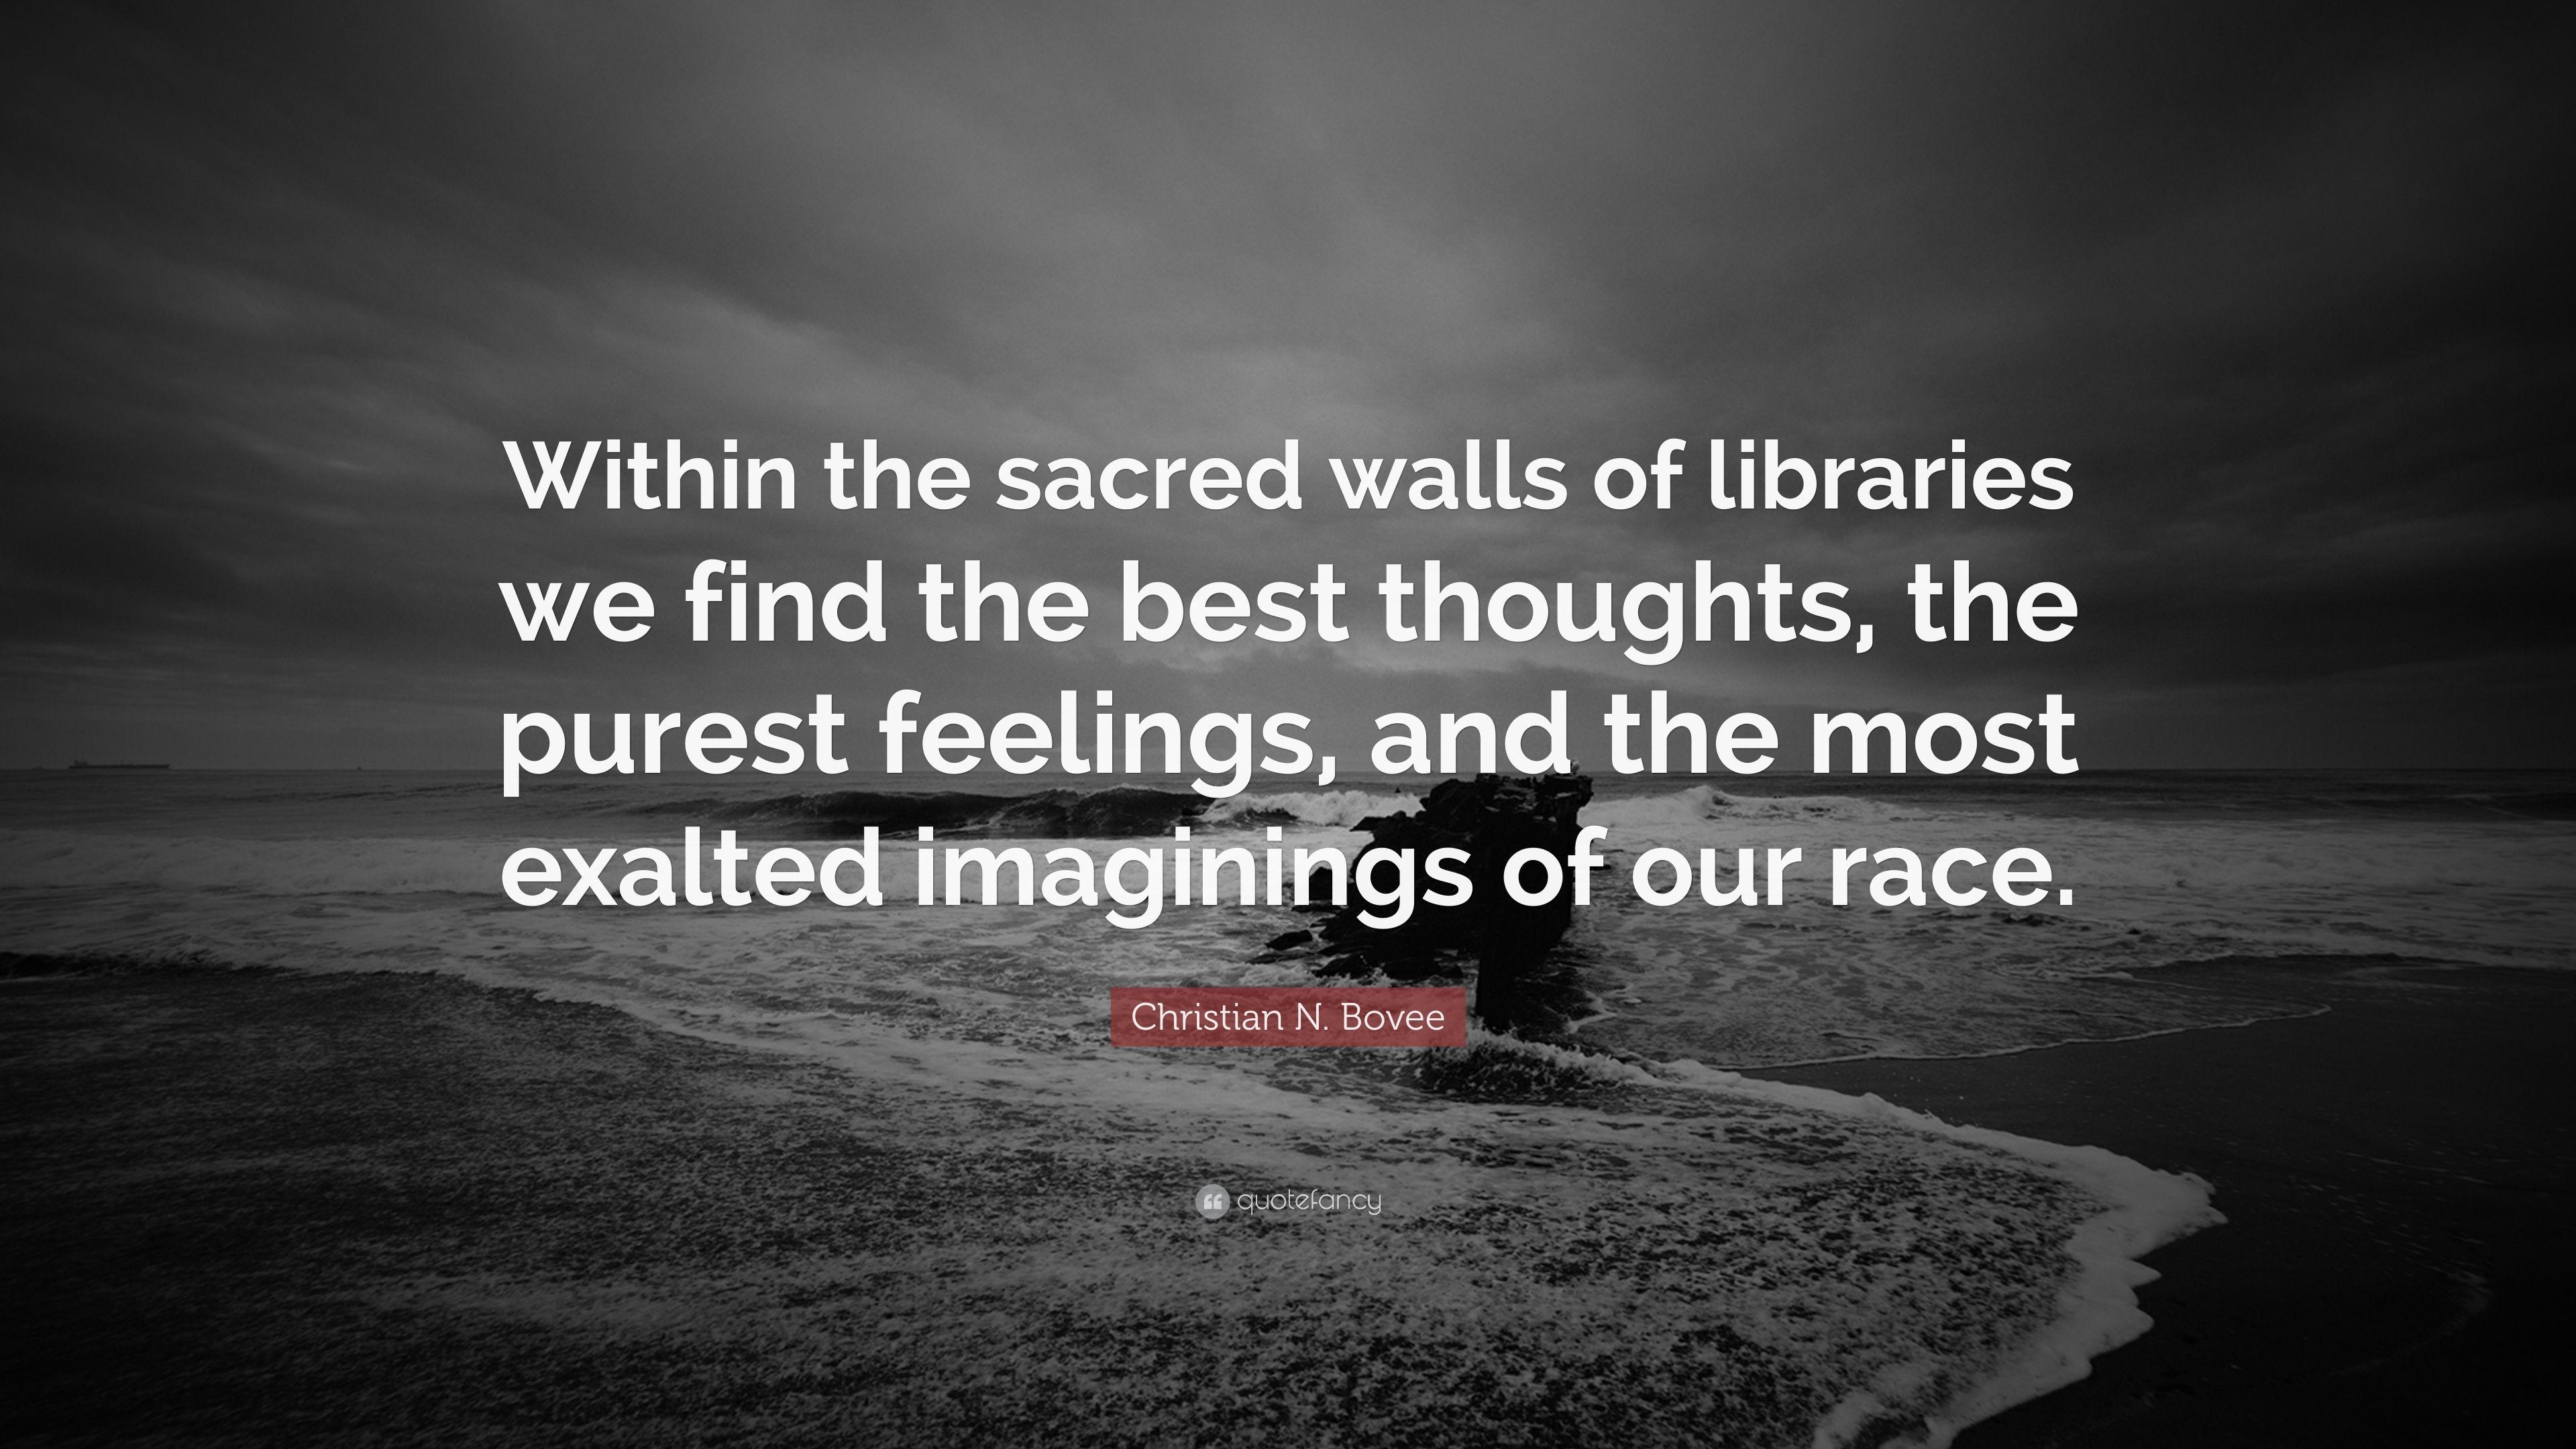 Christian N. Bovee Quote: “Within the sacred walls of libraries we